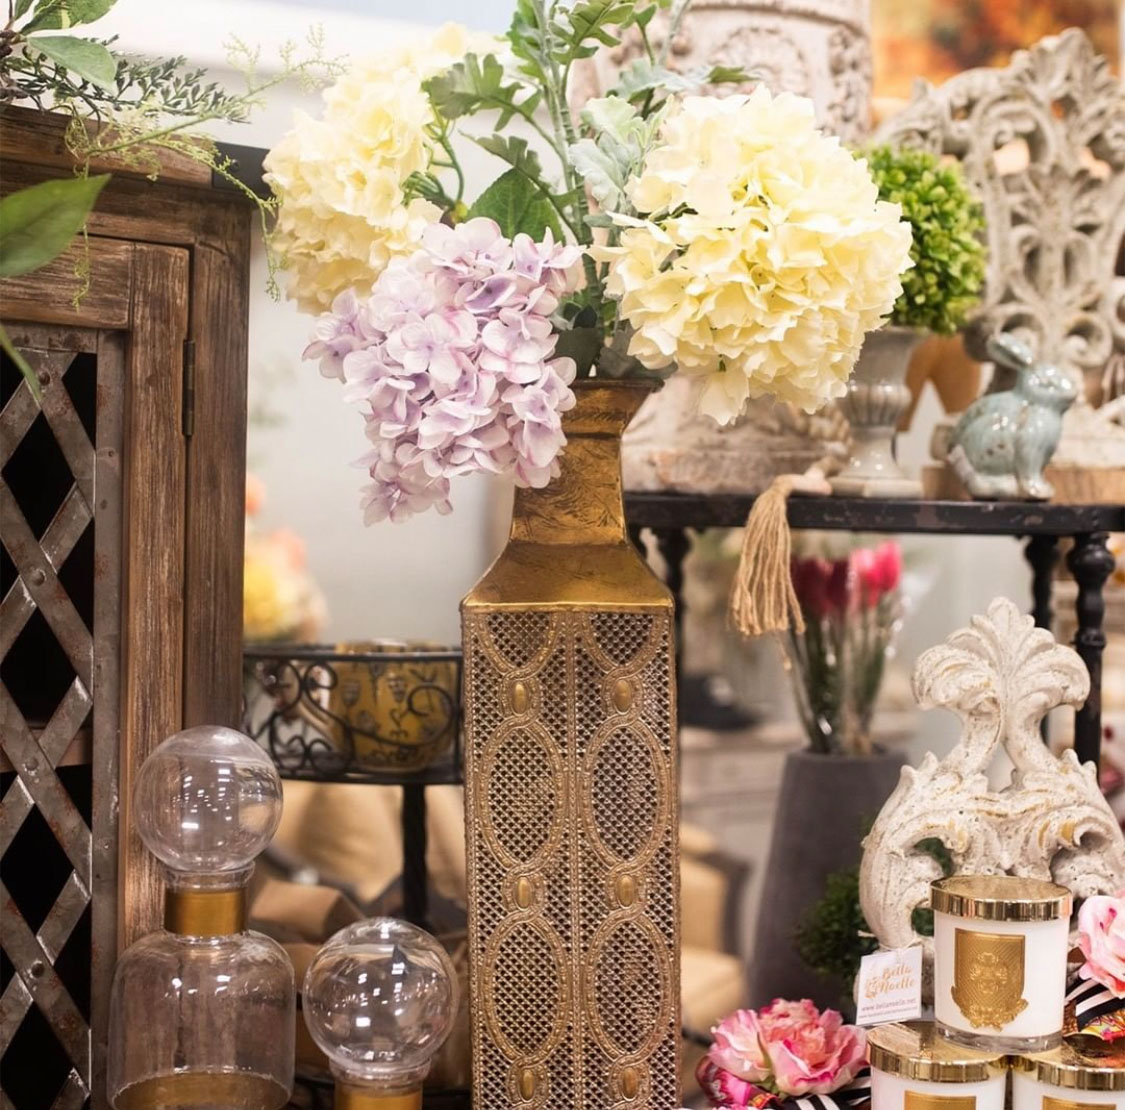 a bronze vase with flowers and various home decor gifts